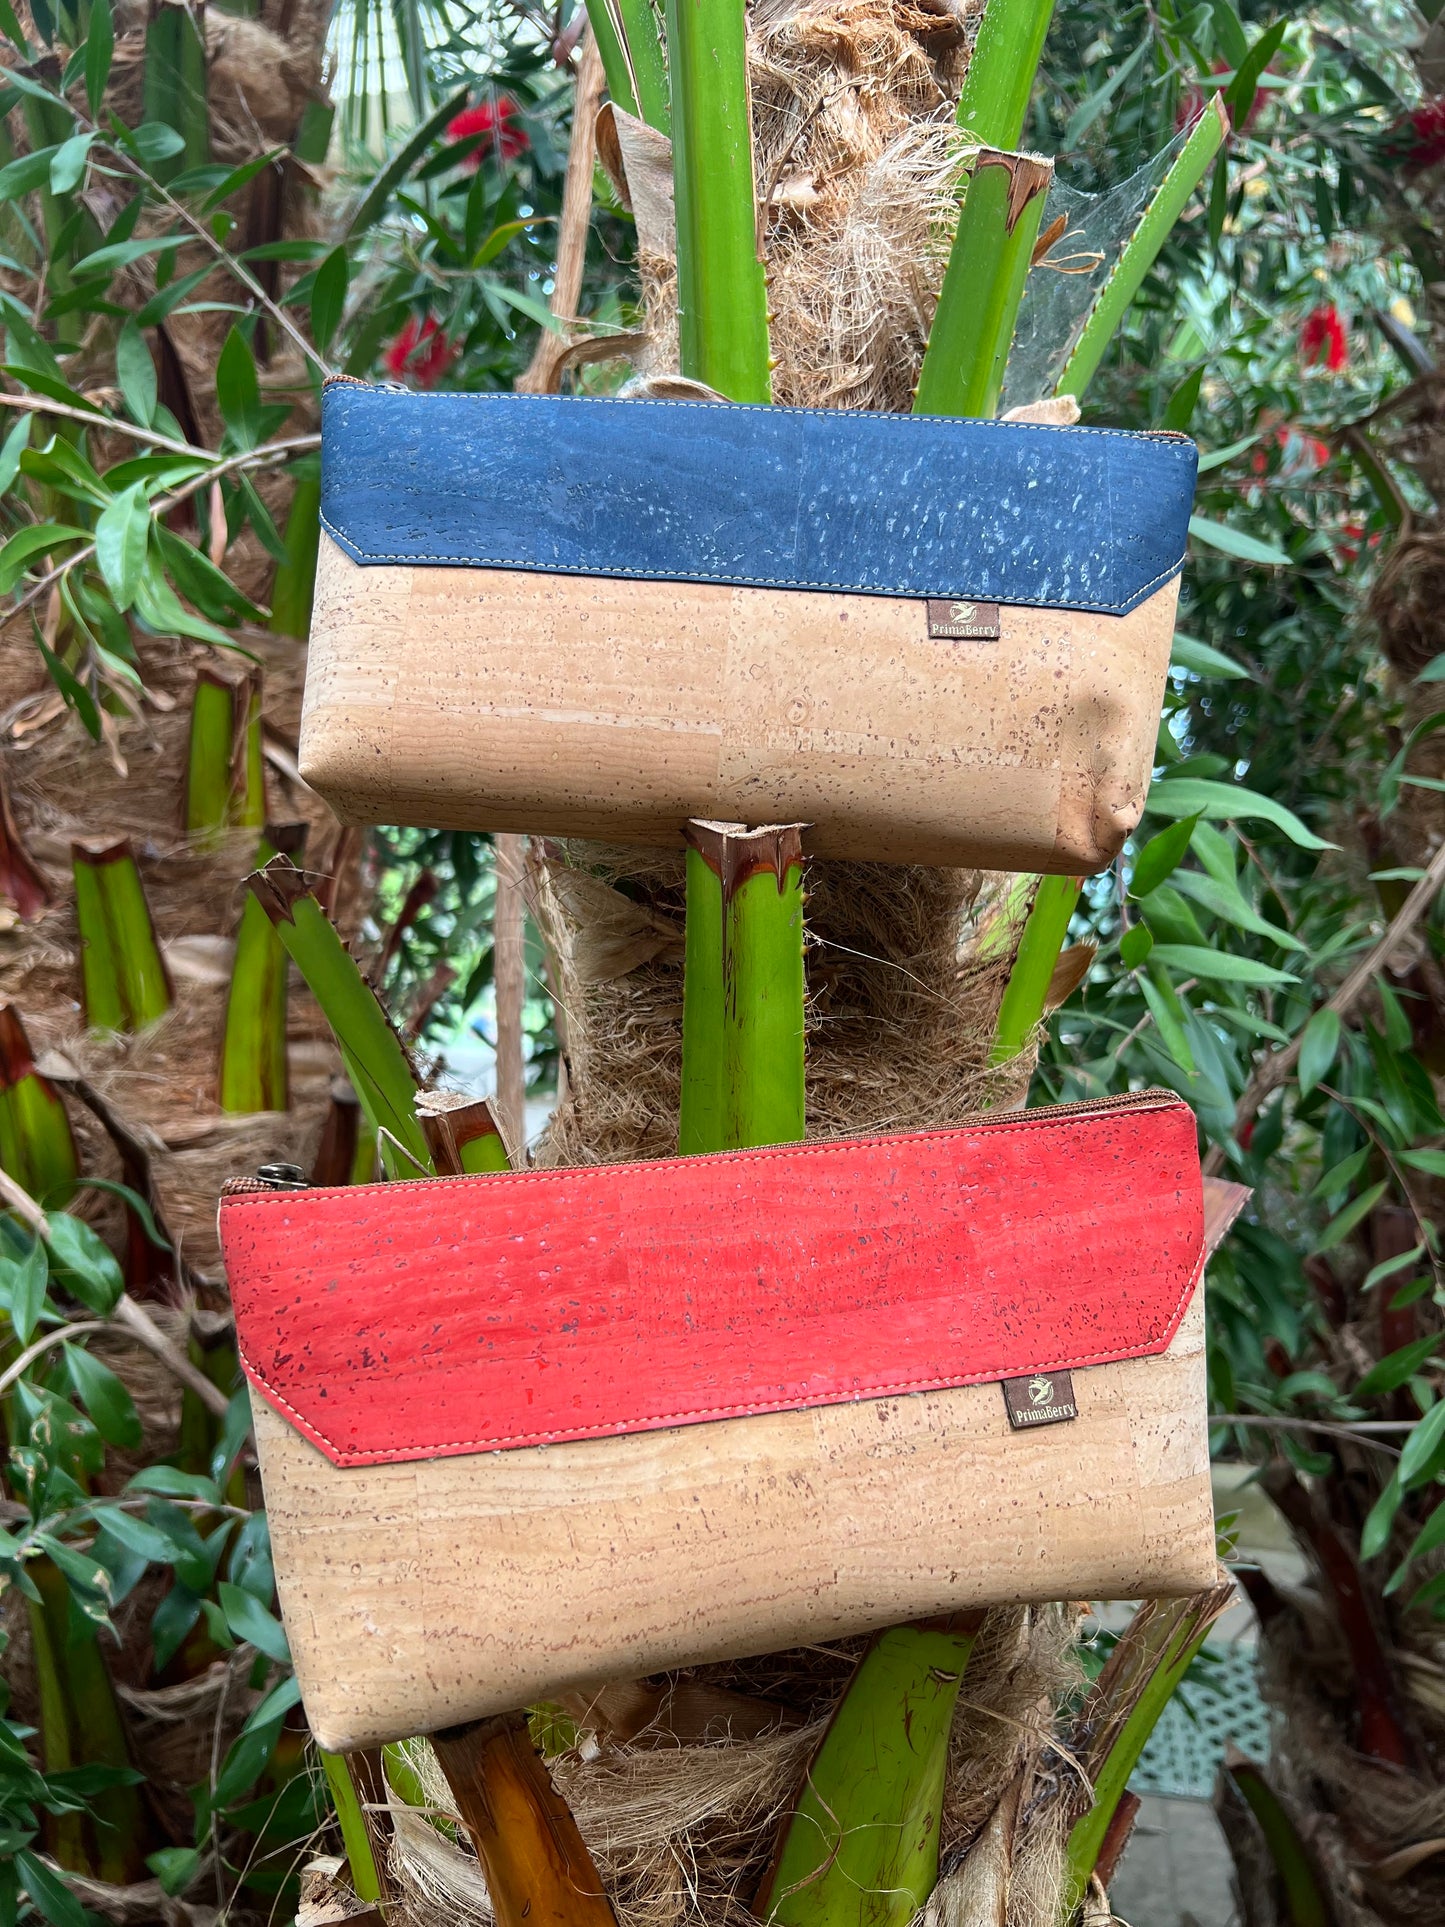 Sea Blue Cork Cosmetic Bag: Sustainable and Stylish Travel Bag Made from Premium Cork